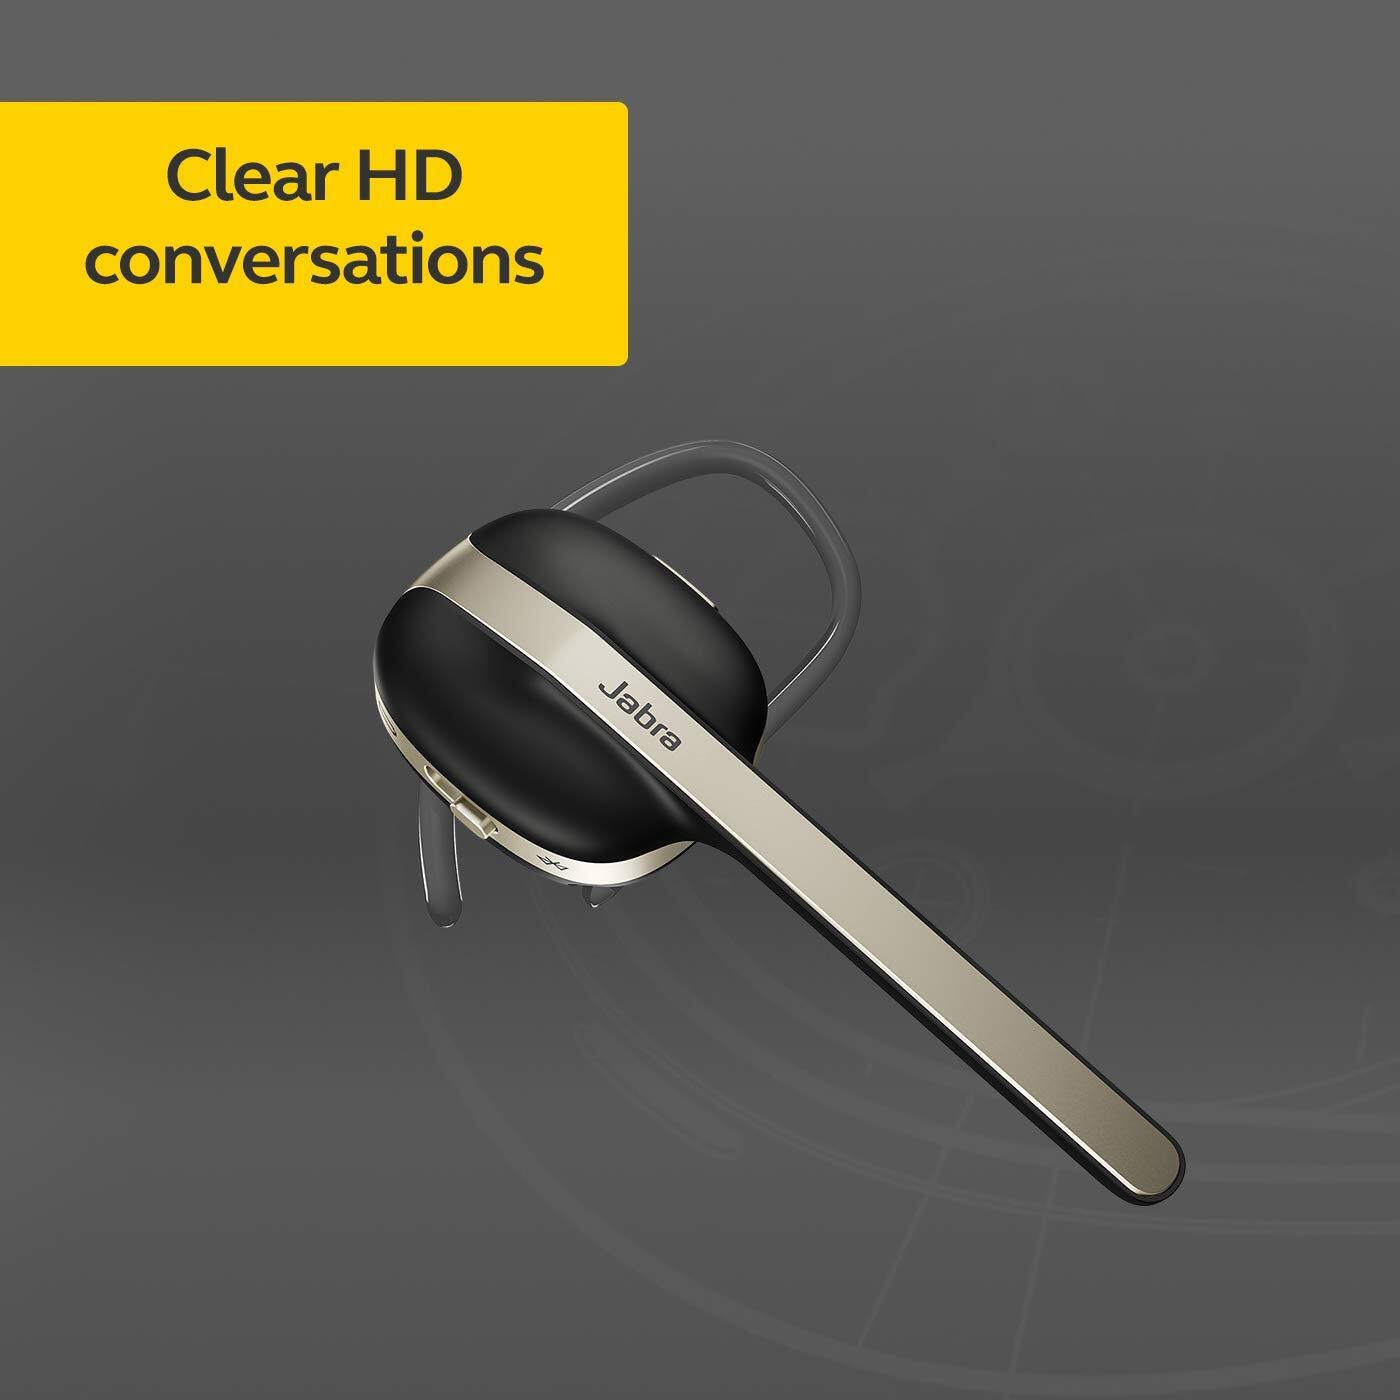 Jabra Talk 30 Bluetooth Headset  with HD calls and dynamic speakers for stream music, podcast and GPS directions - Black-M000000000422 www.mysocially.com